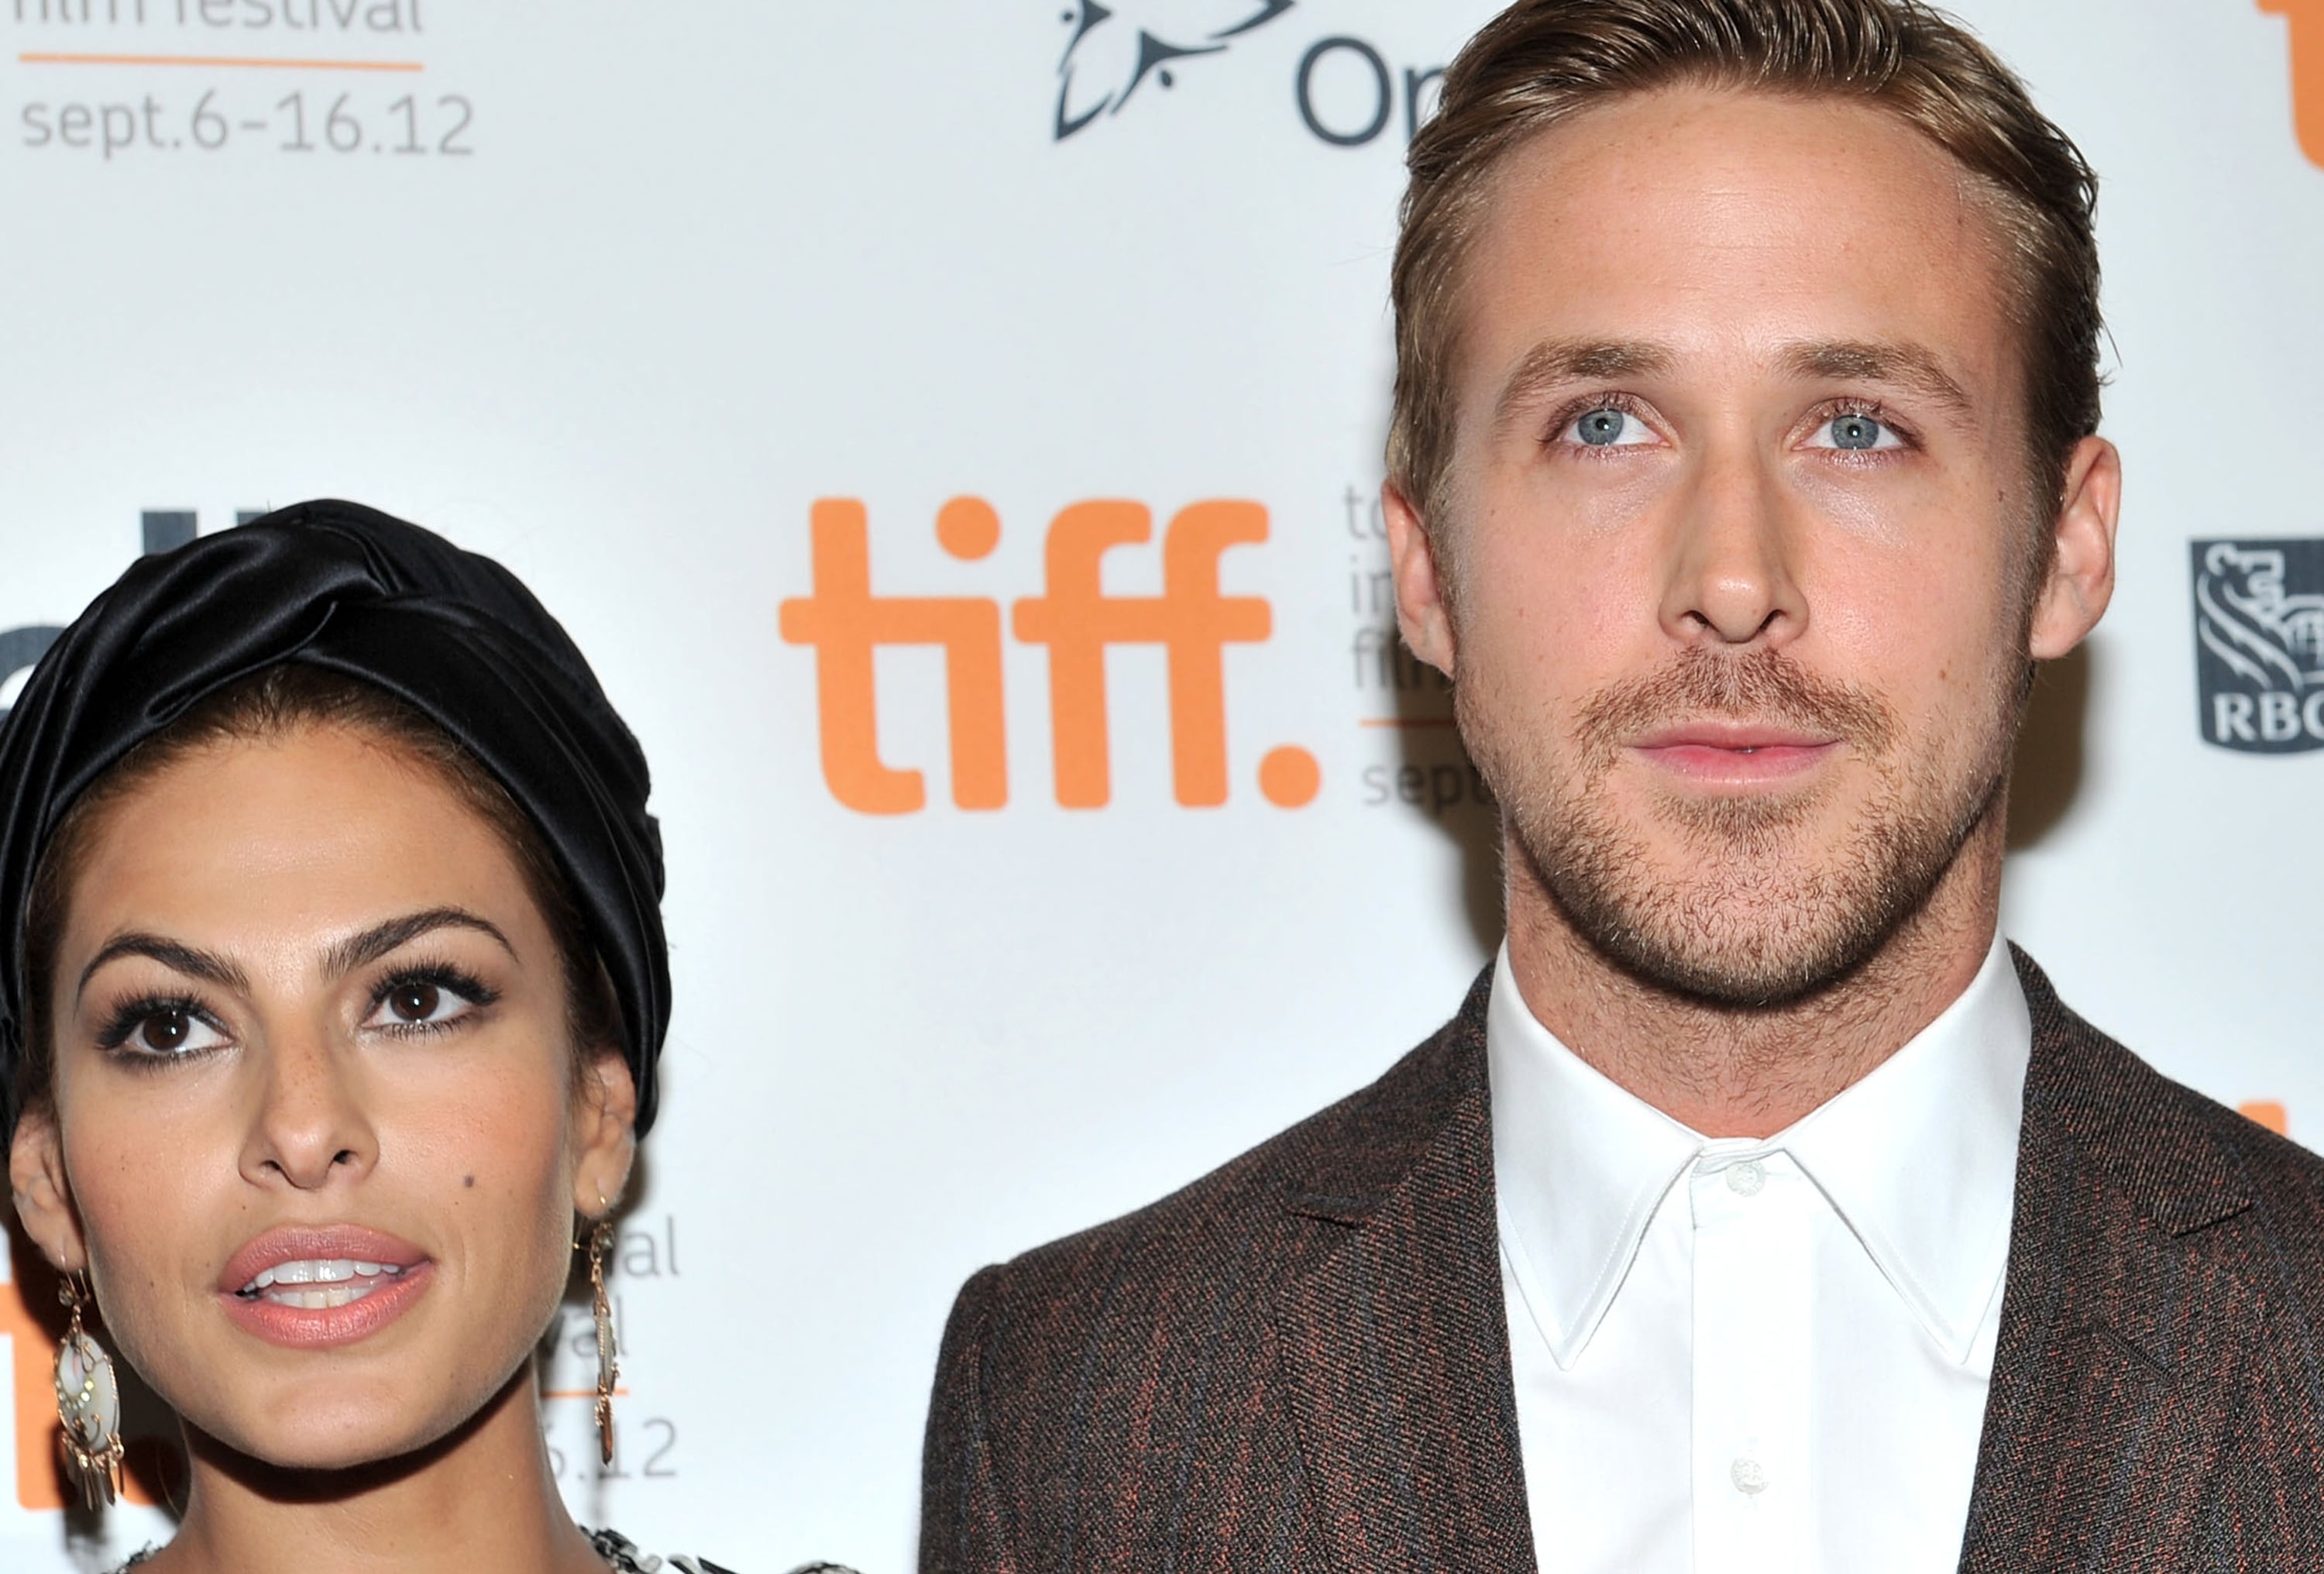 Eva Mendes Likely Won’t Join Ryan Gosling For Any “Barbie” Red Carpets — Here’s Why